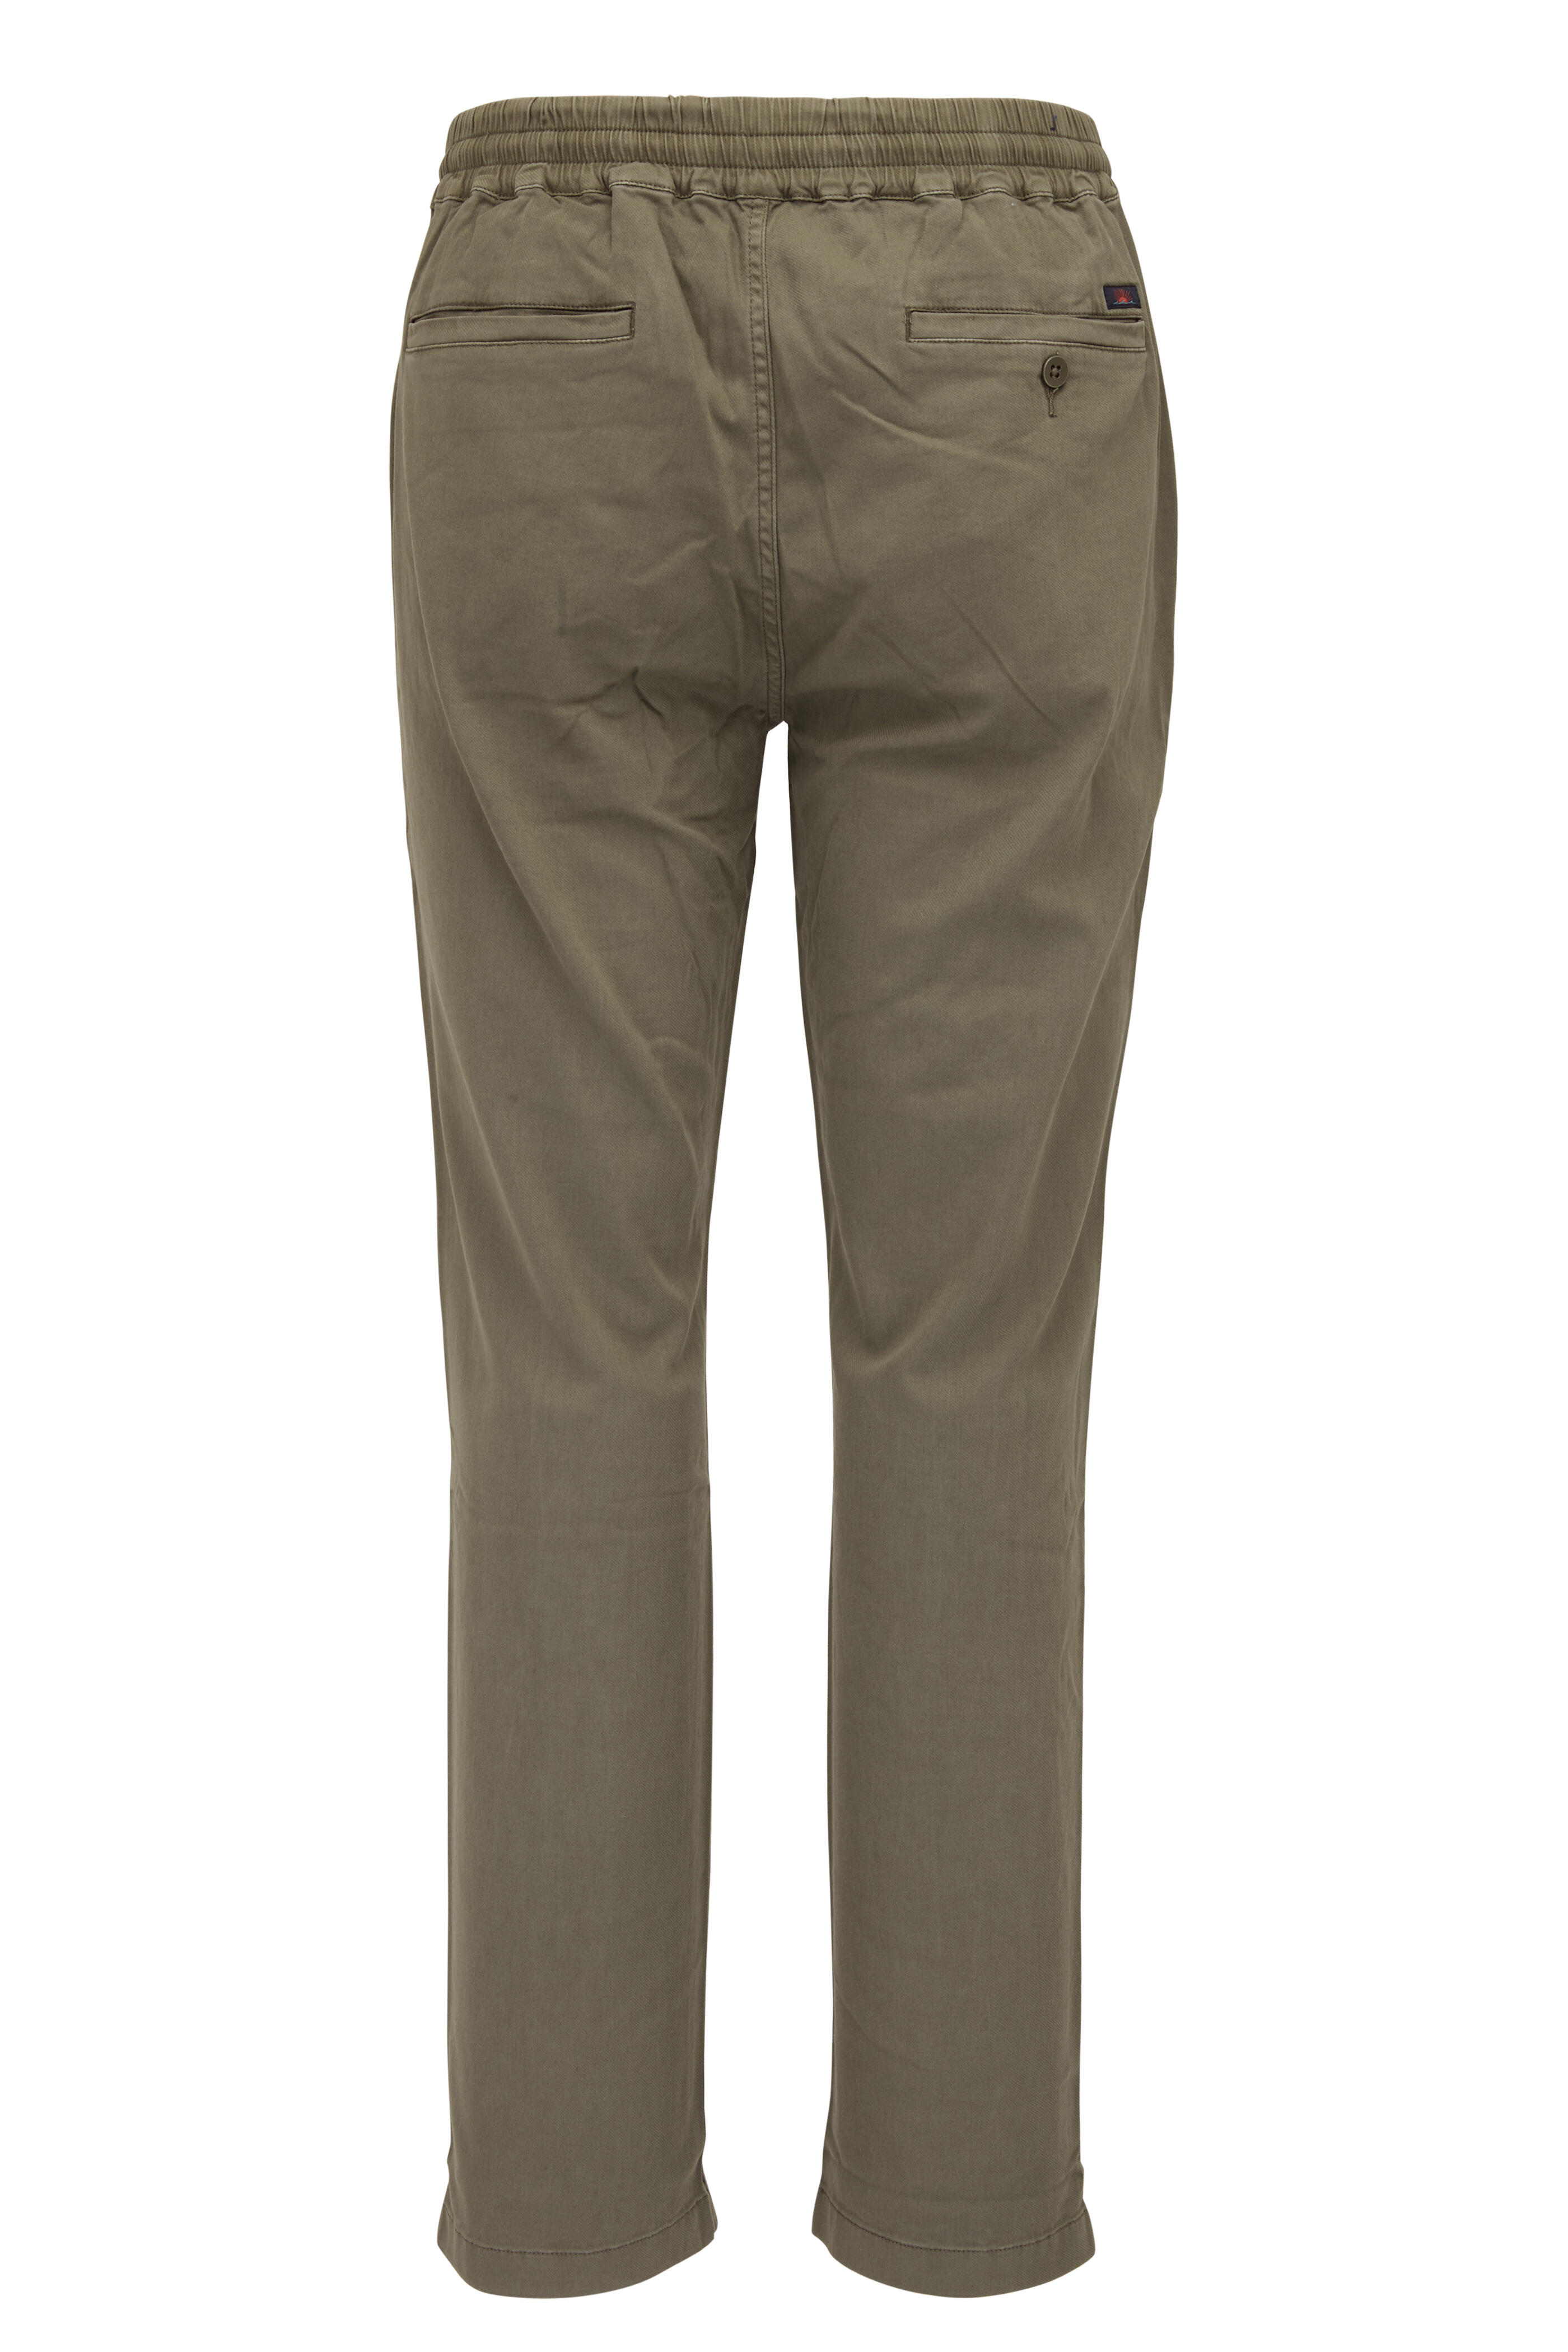 Faherty Brand - Essential Spring Olive Pant | Mitchell Stores